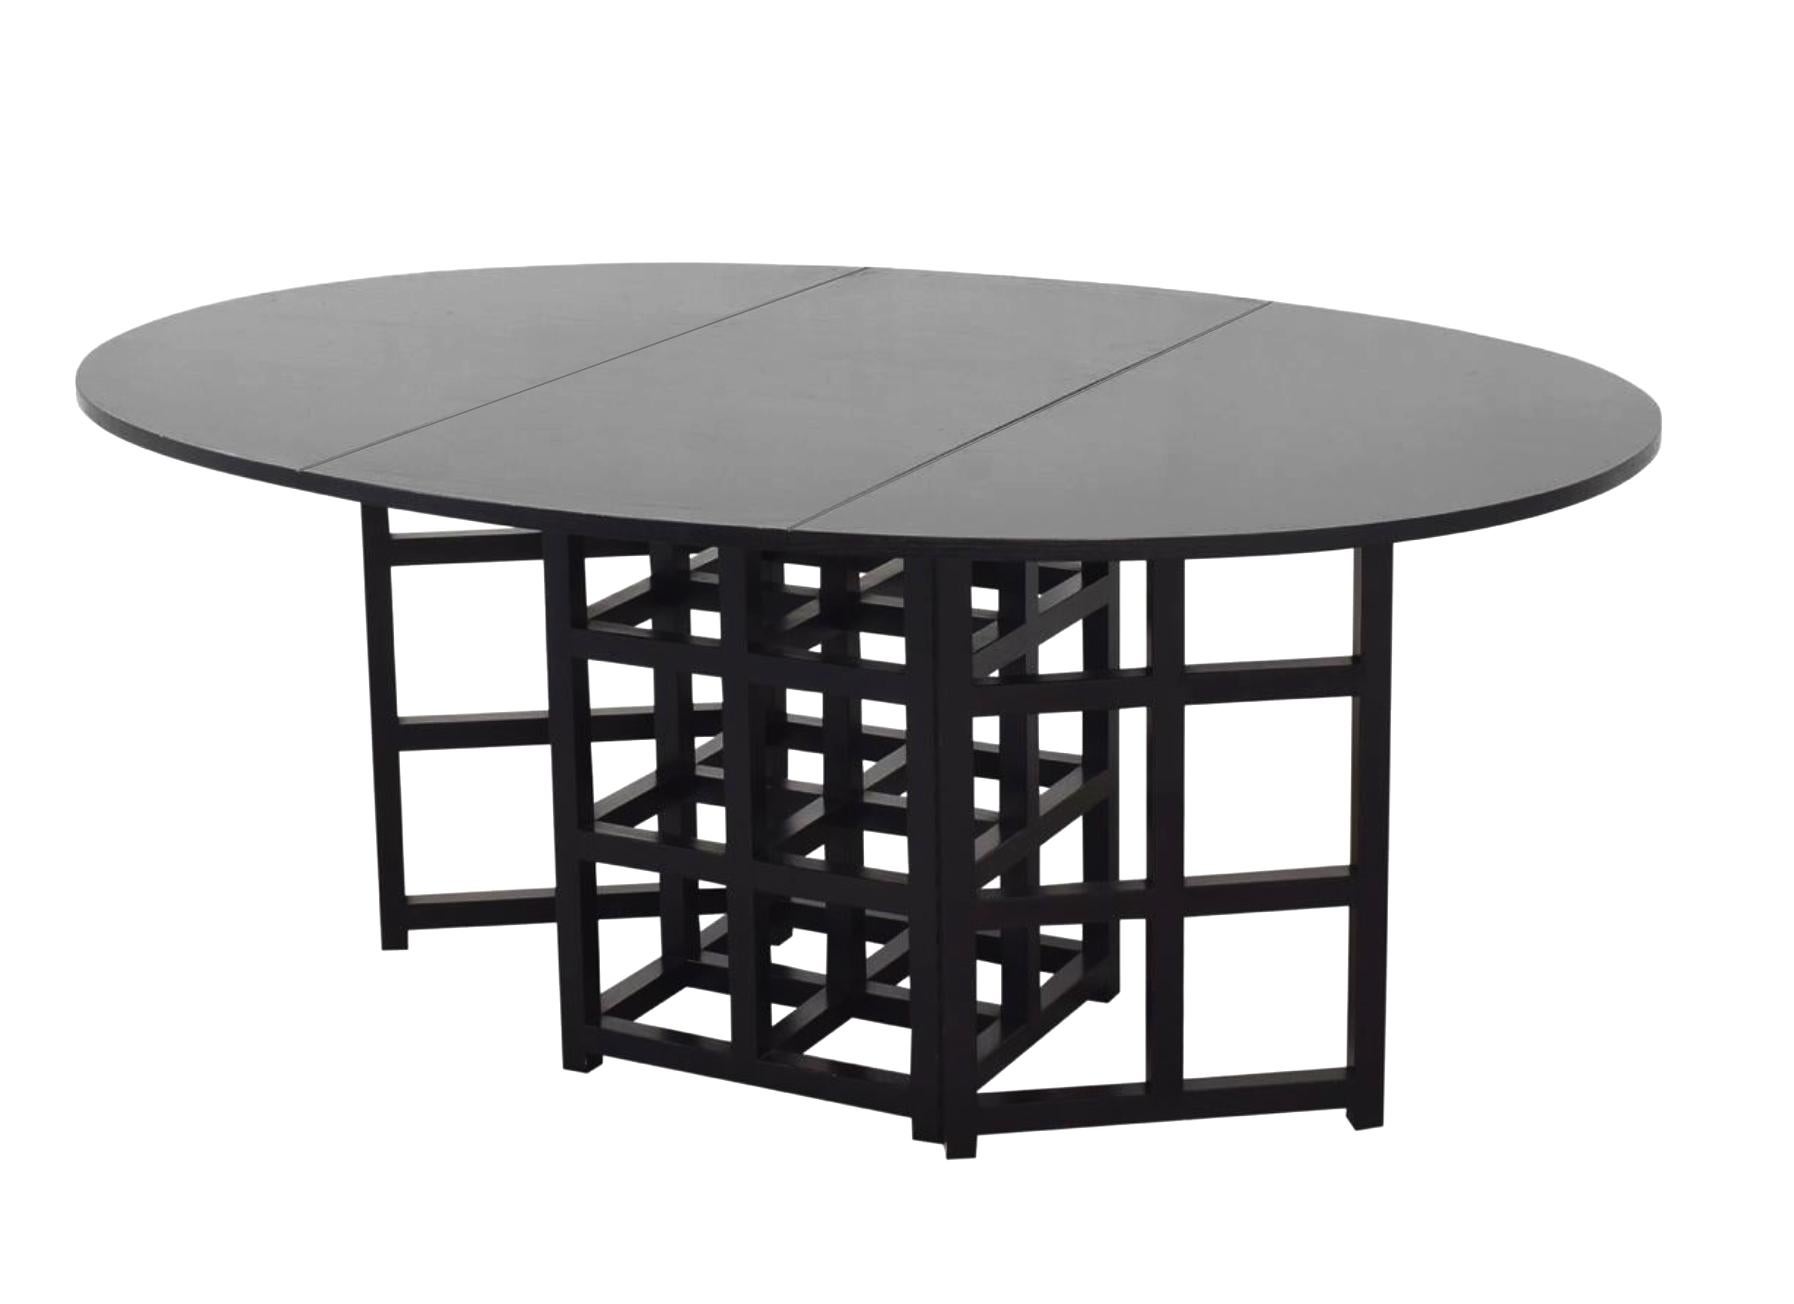 Charles Rennie Mackintosh ebonized ash folding oval table DS.1 Alivar, 1970s Prestigious, oval table in black colored ash with two hinged, folding sides, model: 322 D.S.1, a design by the Scottish designer Charles Rennie Mackintosh dating from 1918,